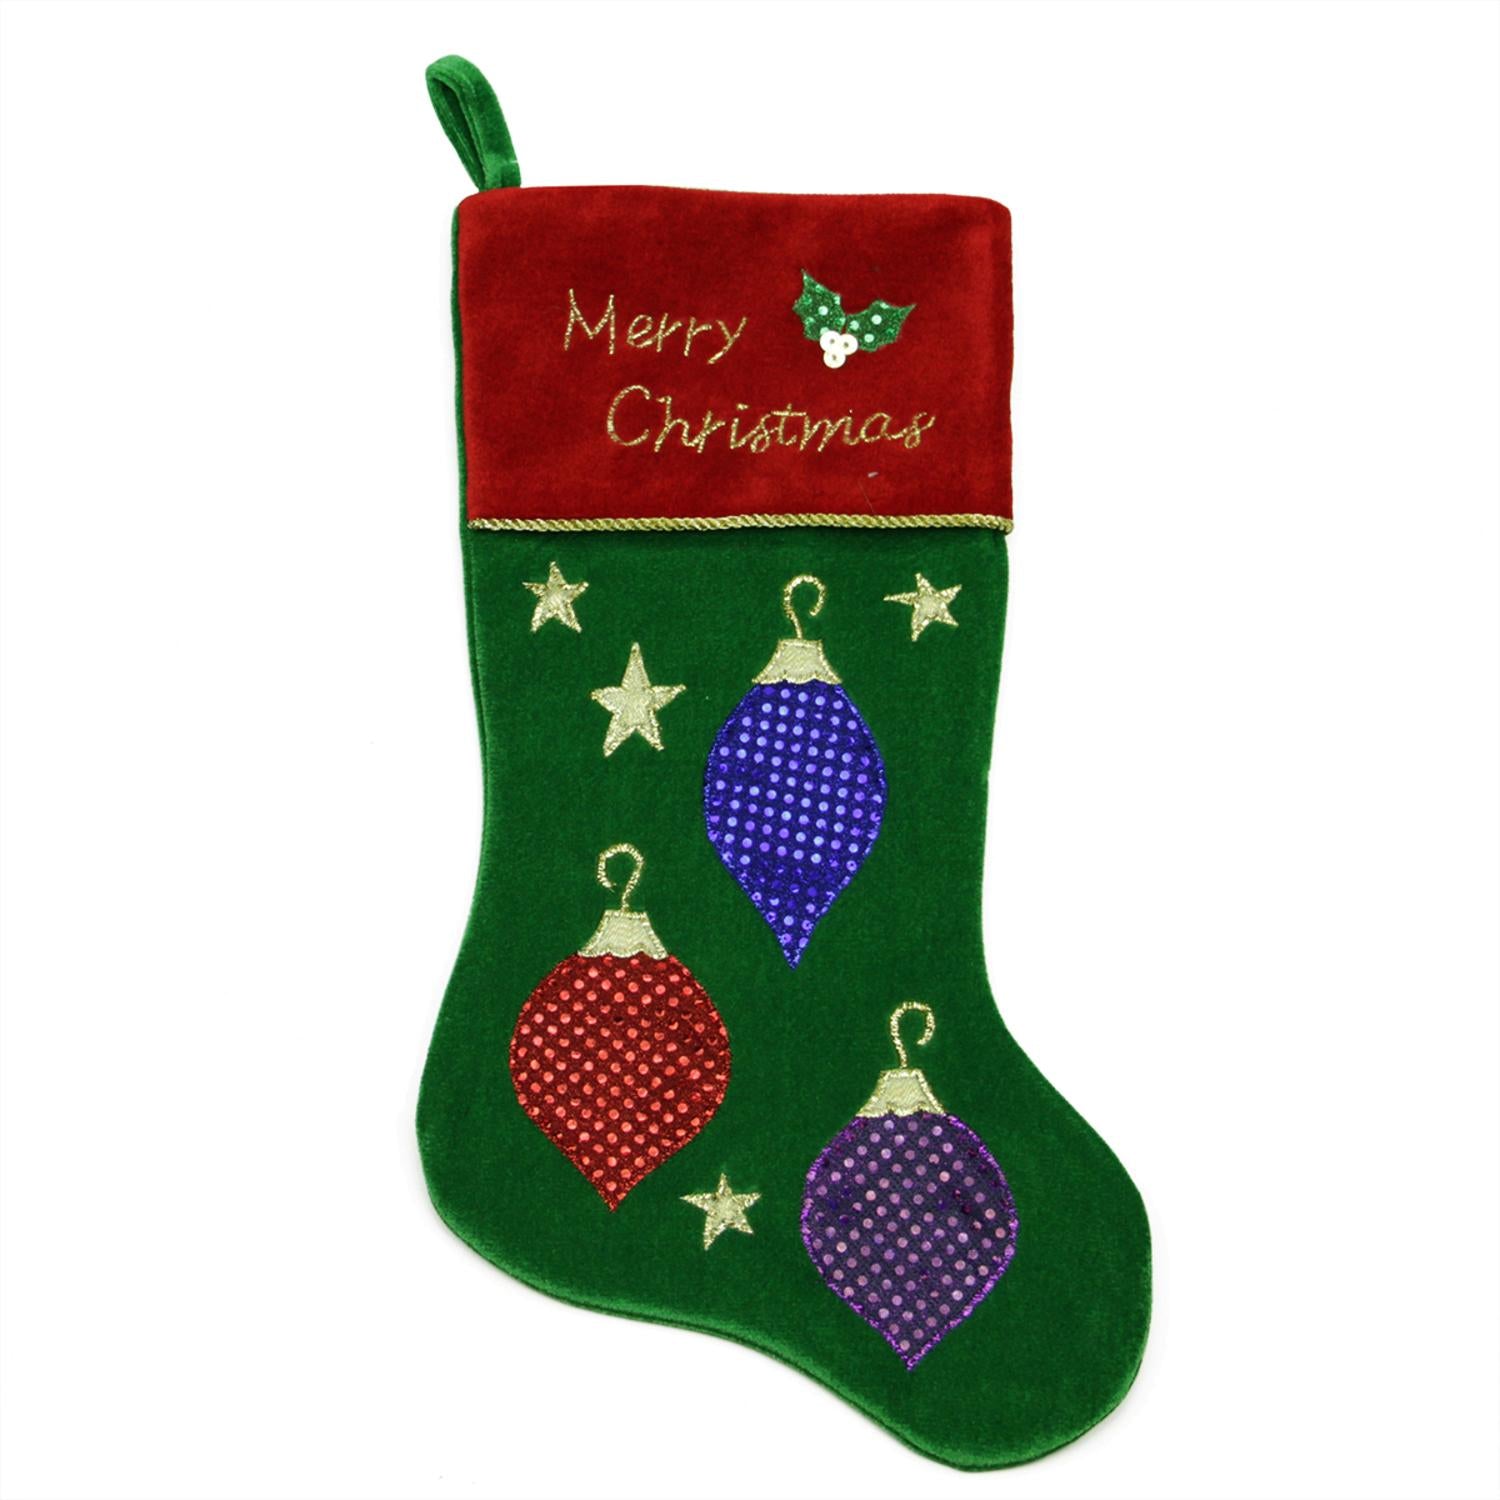 20" Green Embroidered Velveteen Christmas Ornament Stocking with Red Cuff